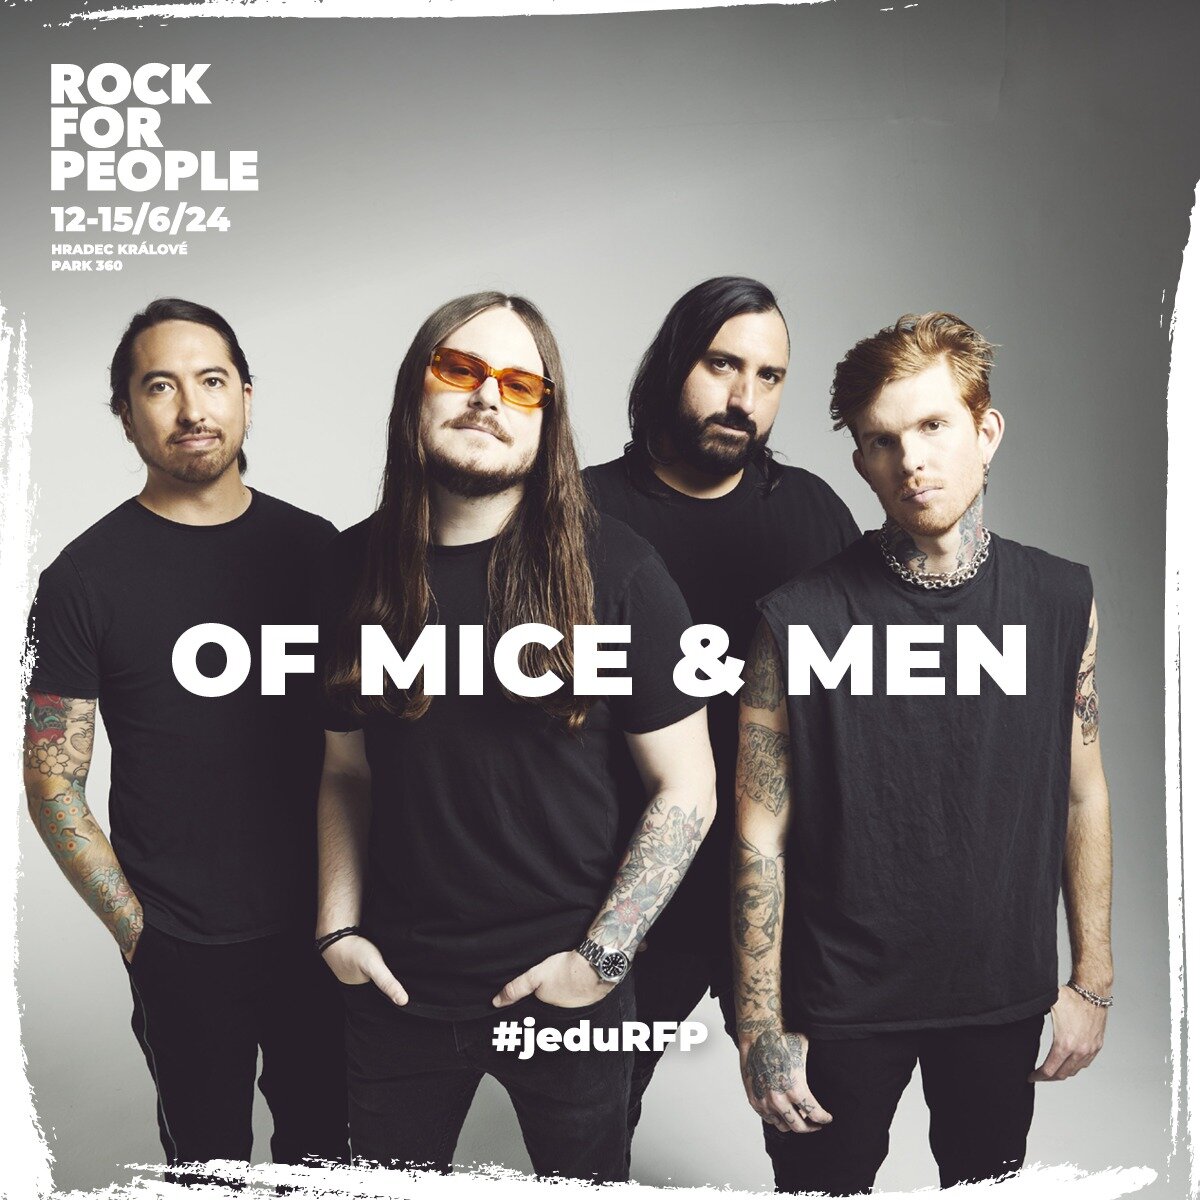 @rockforpeople! We are very excited to be back in the Czech Republic this summer on 12th June, see you in the pit!